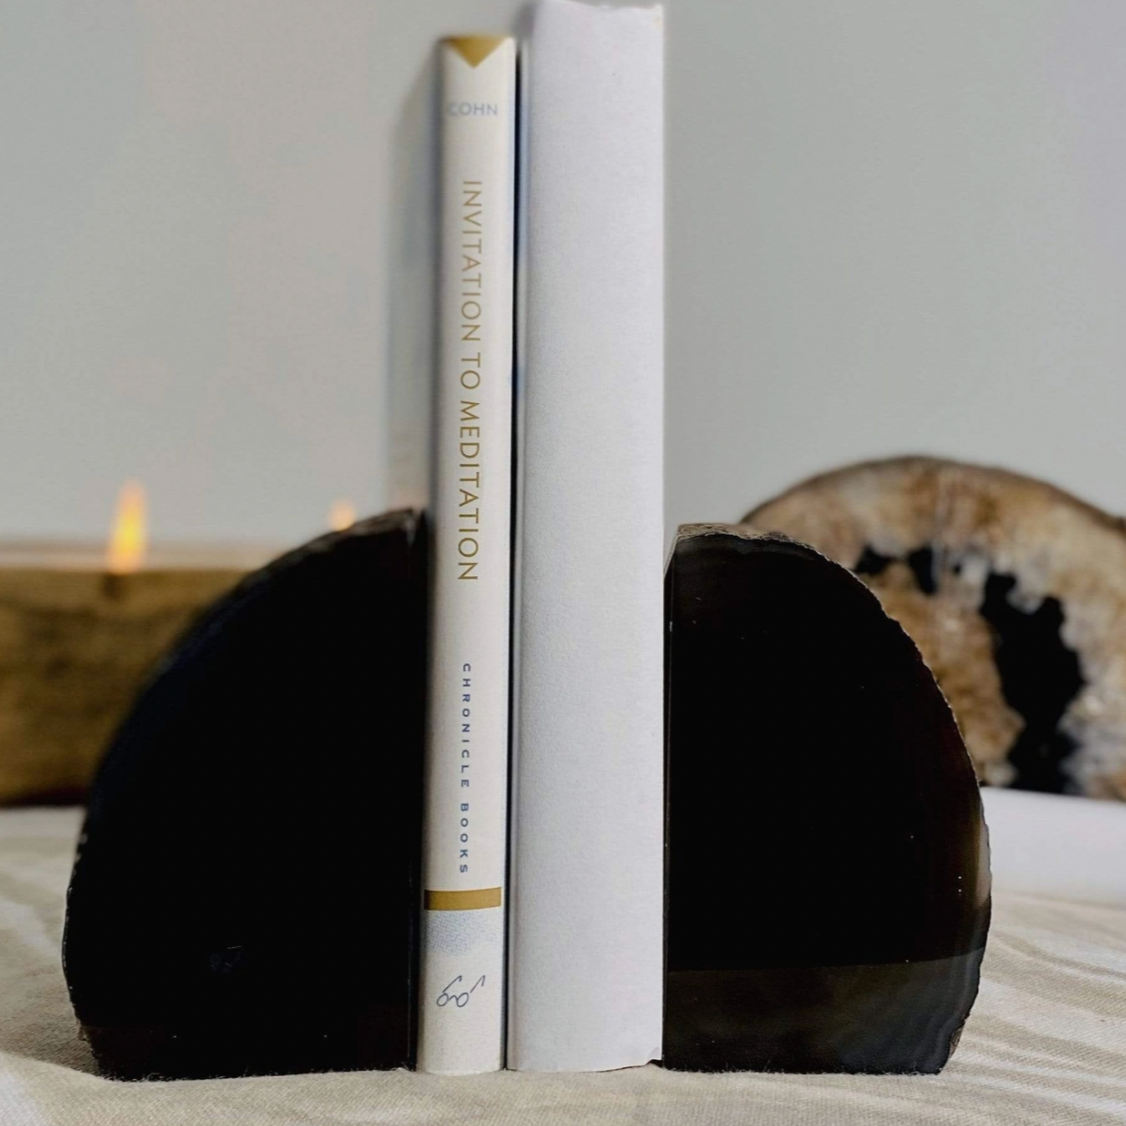 Black Agate Bookend Pair - 1 to 3 lb, Set of 2